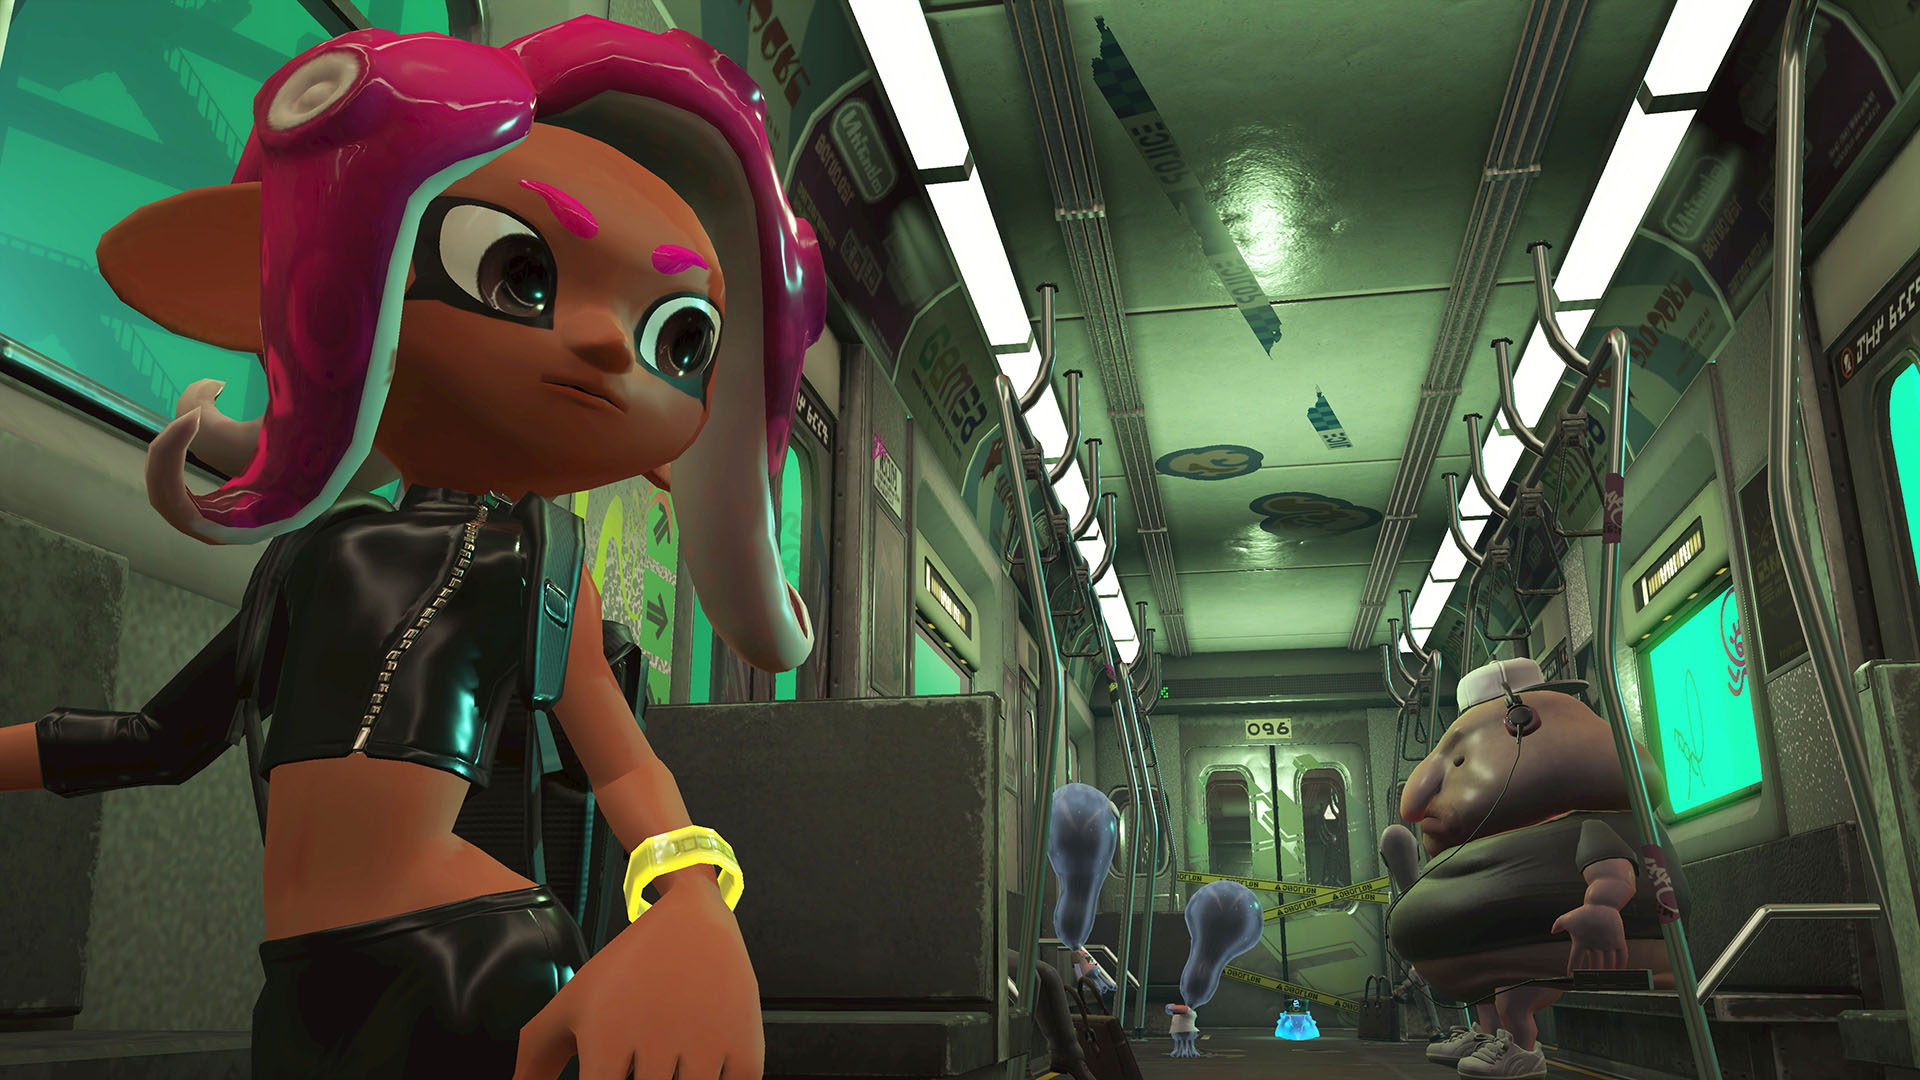 Splatoon S Stylish World Was Inspired By Skateboarding And Hip Hop